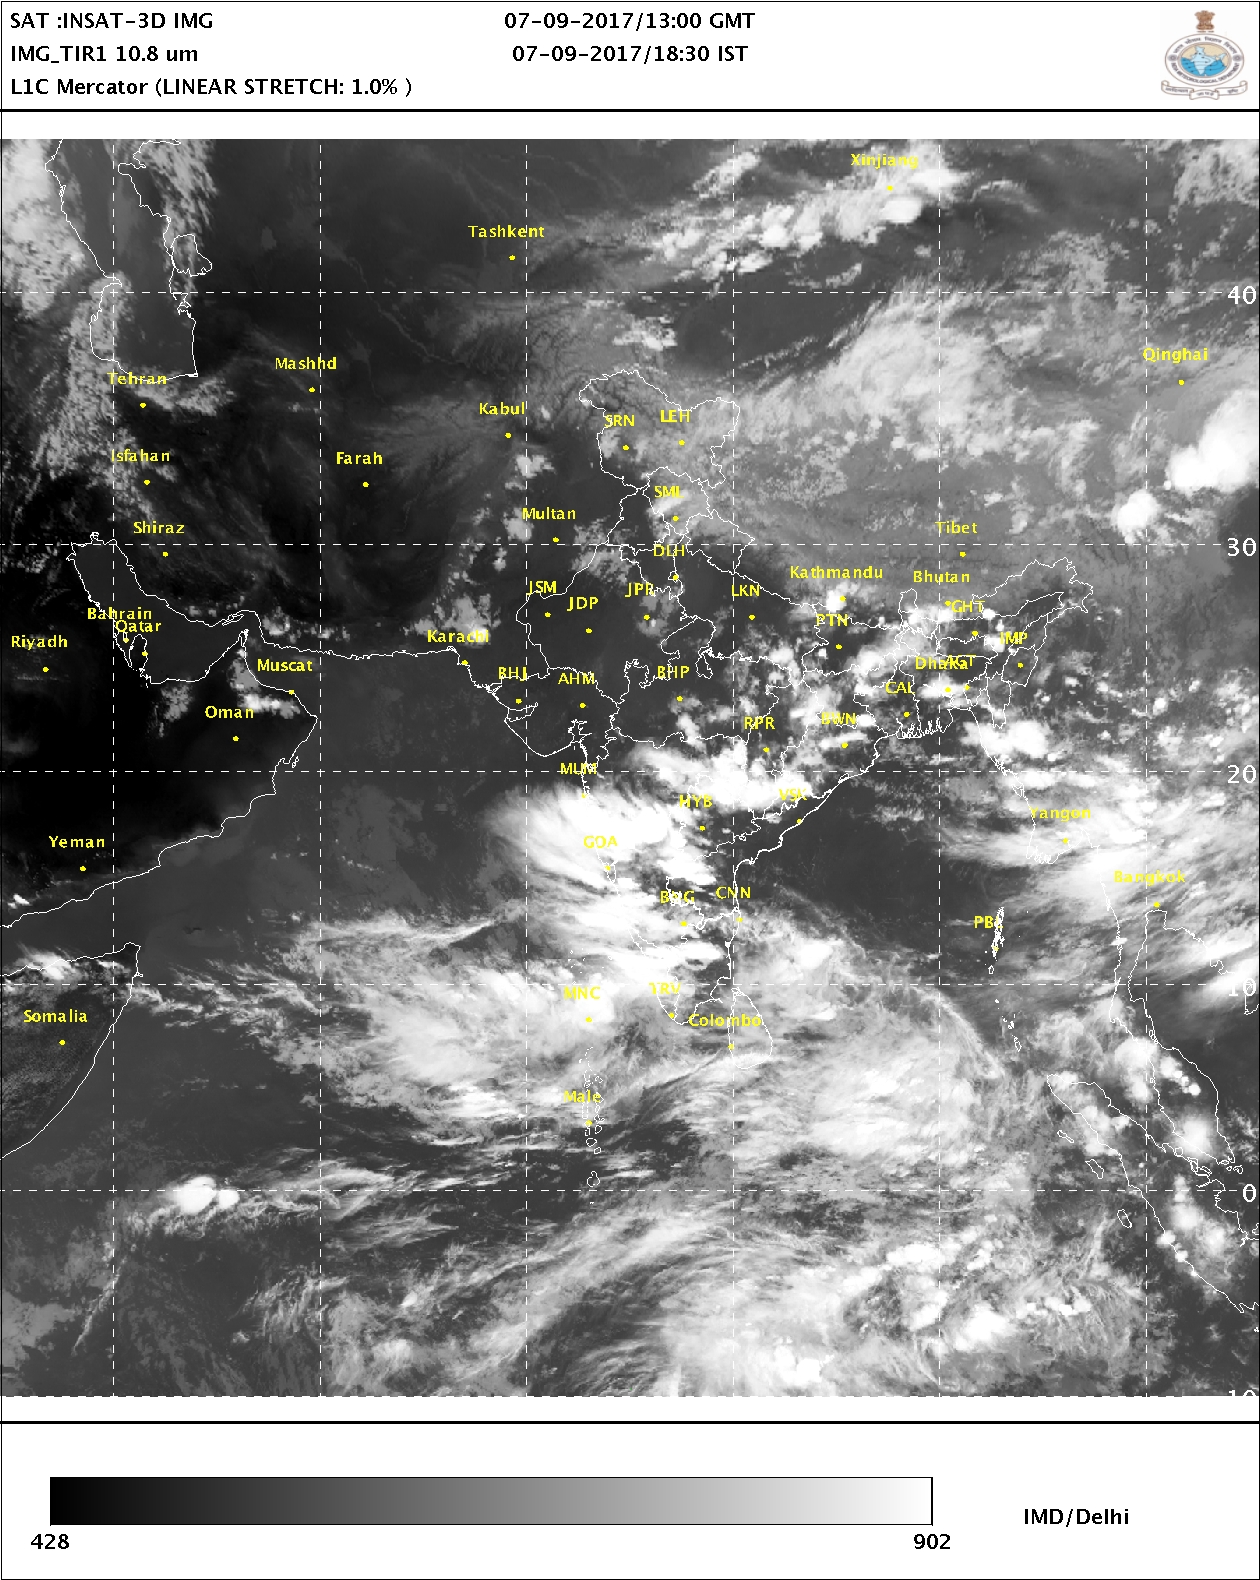 Satellite picture of 7th September 2017 1830 hrs IST